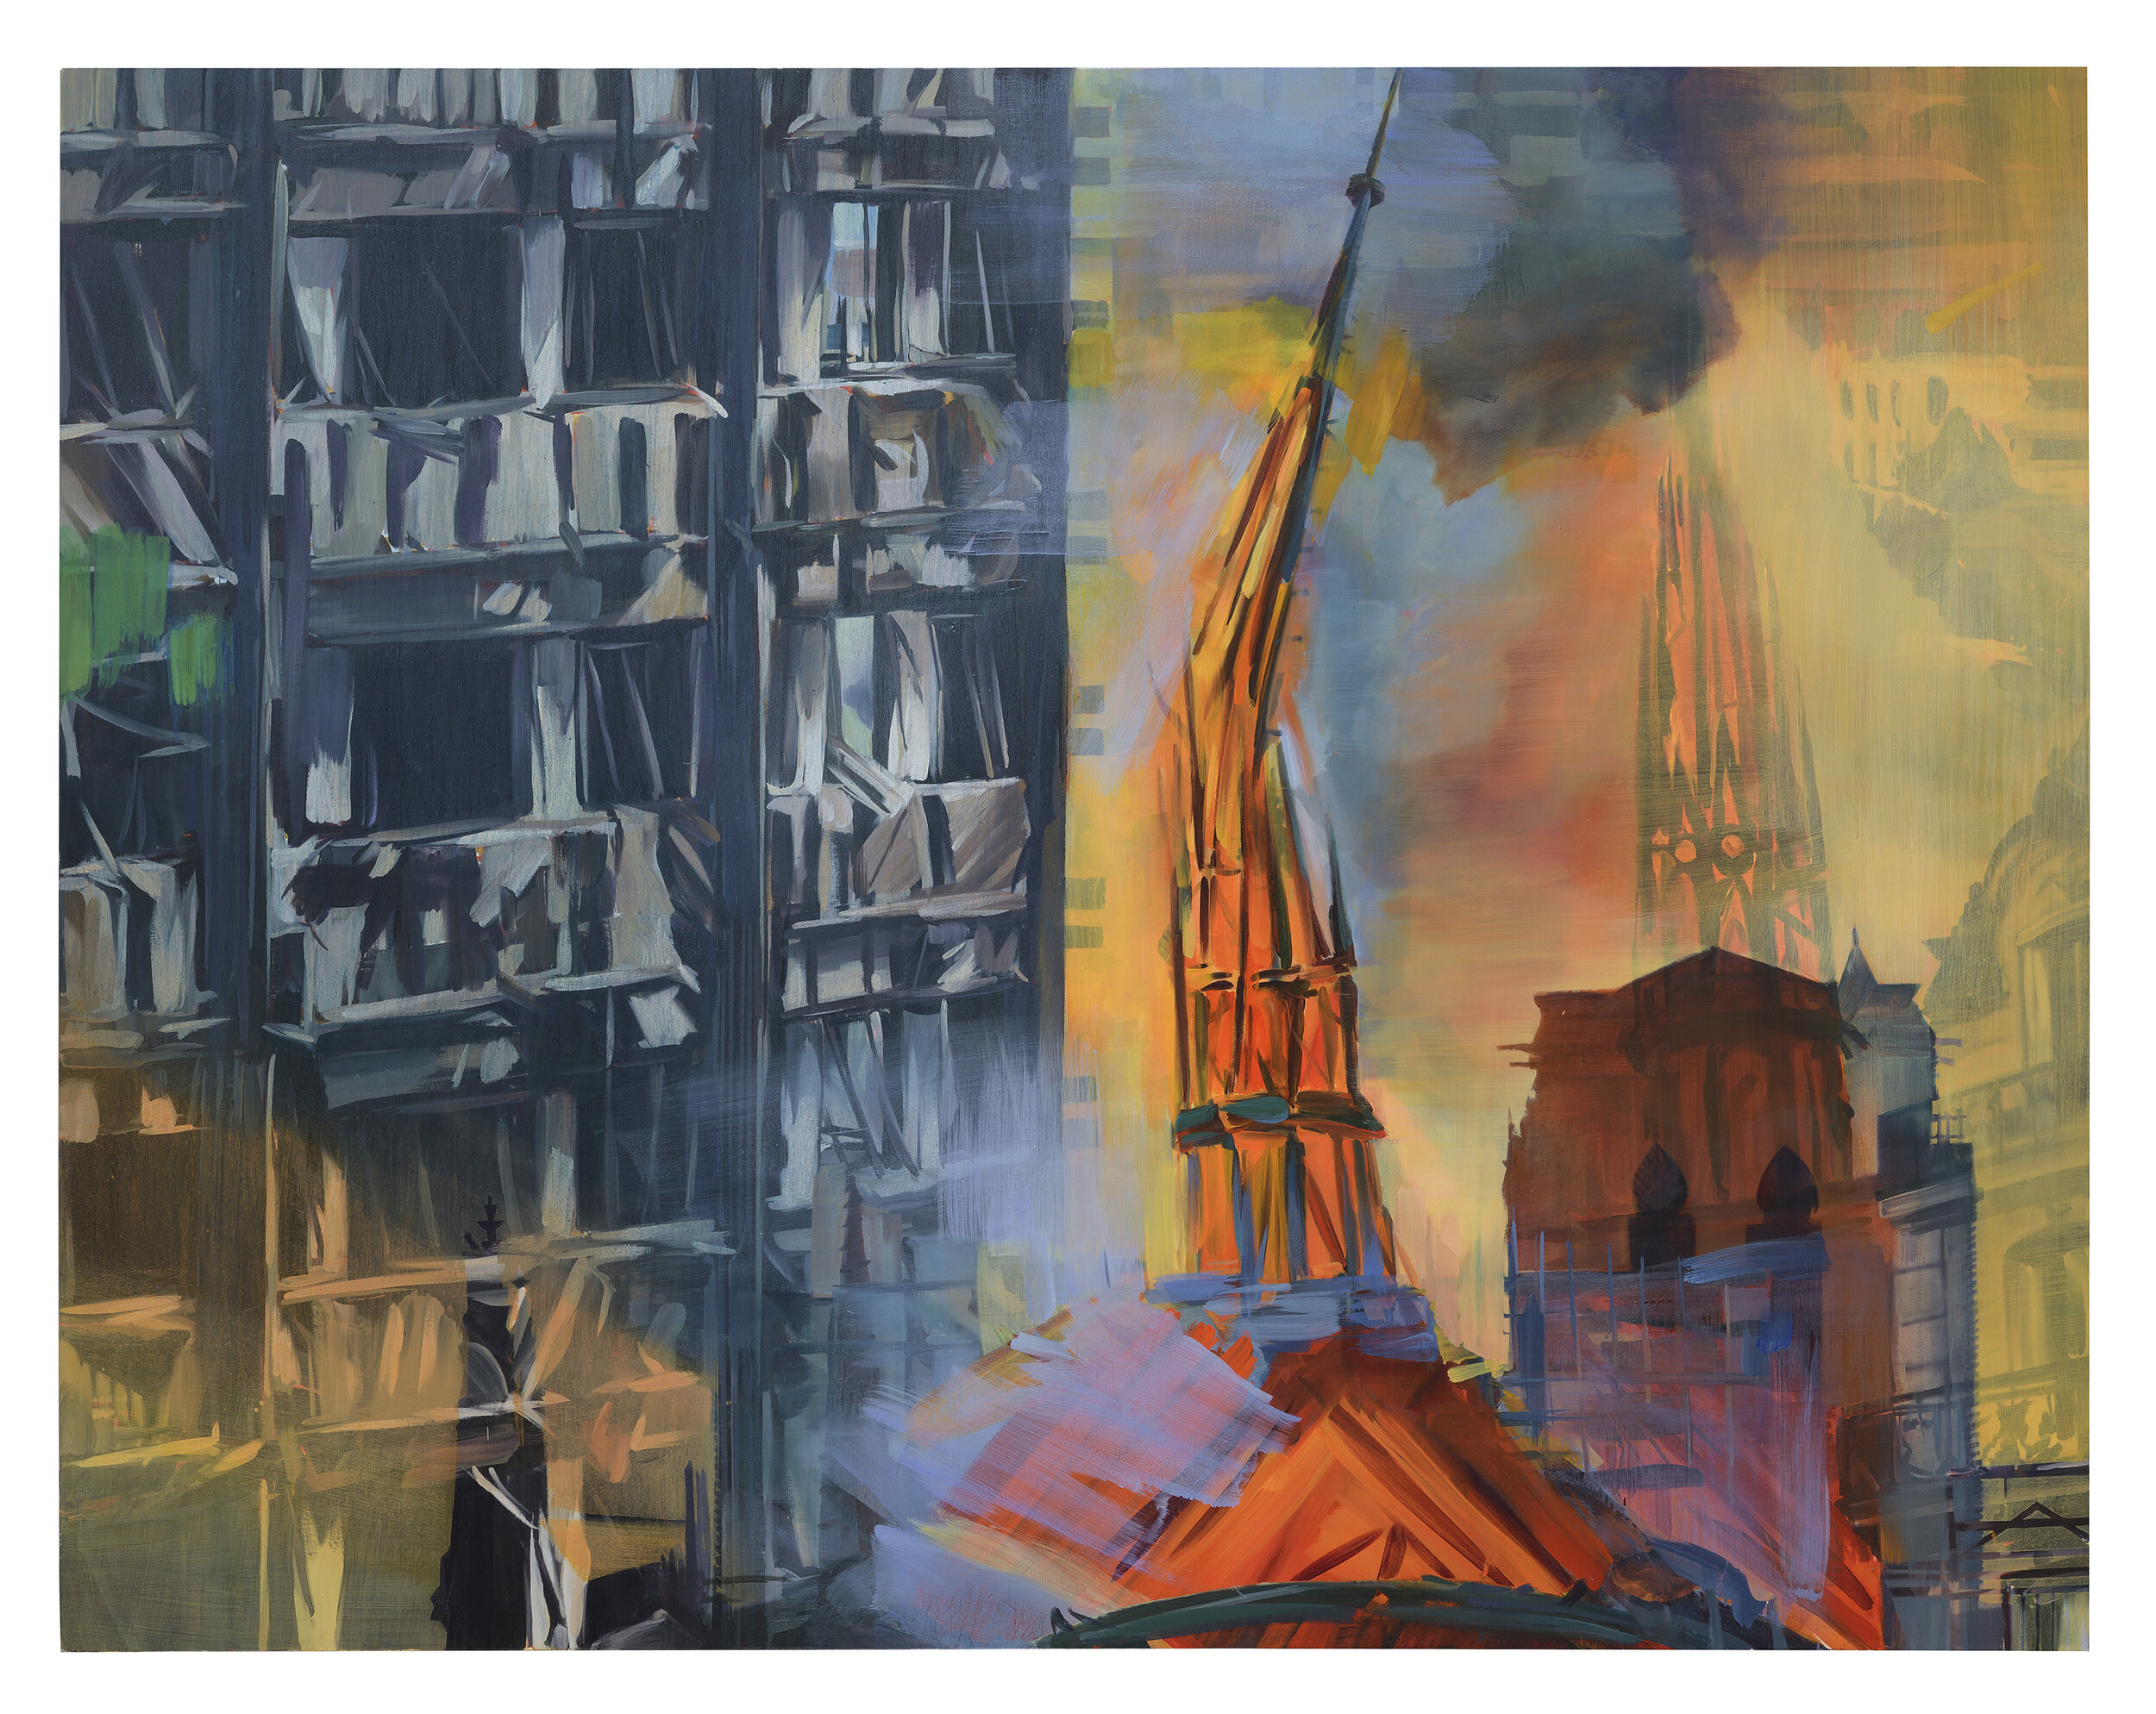   The Capital of Hell - Grenfell - Notre Dame , 2020, oil on canvas, 208x266cm 